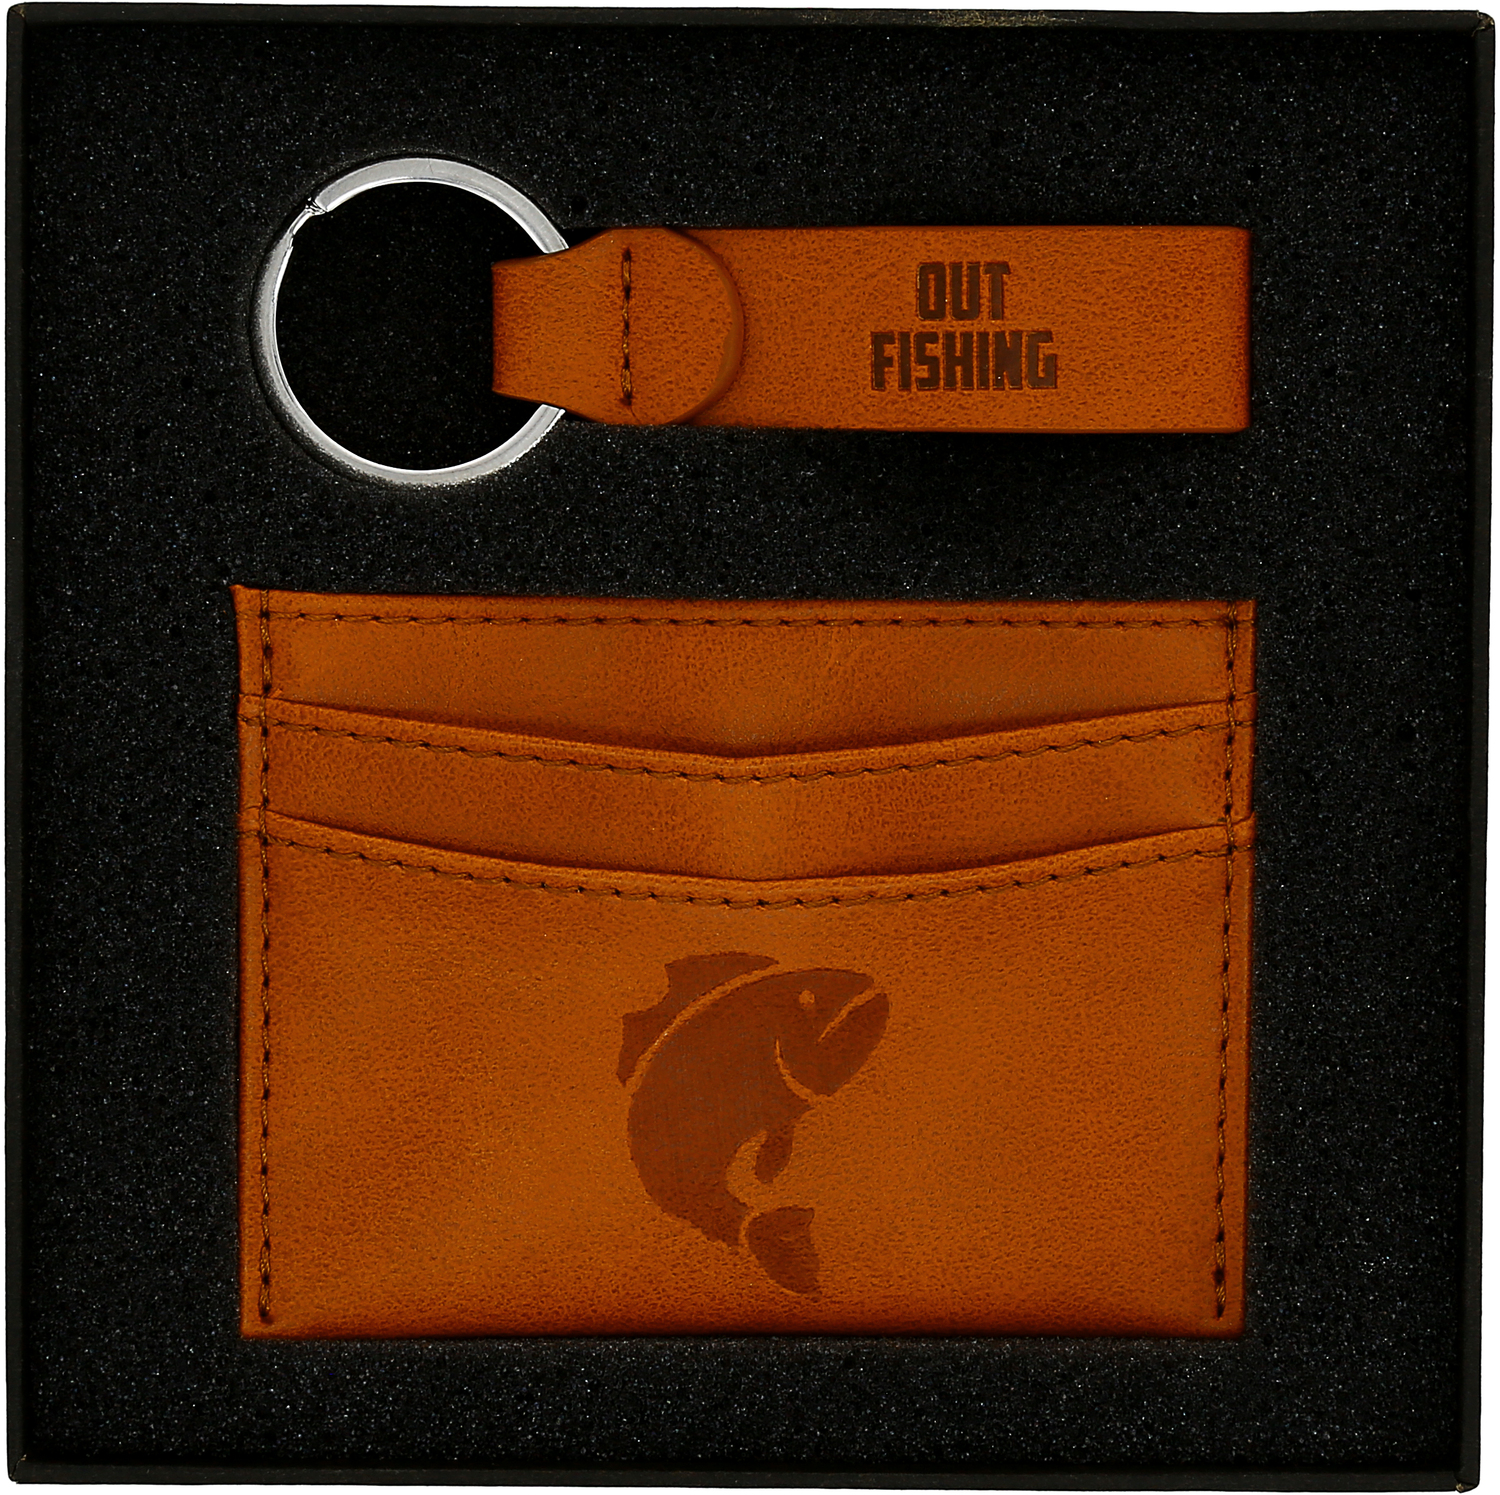 Fishing by Man Out - Fishing - PU Leather Keyring & Wallet Set